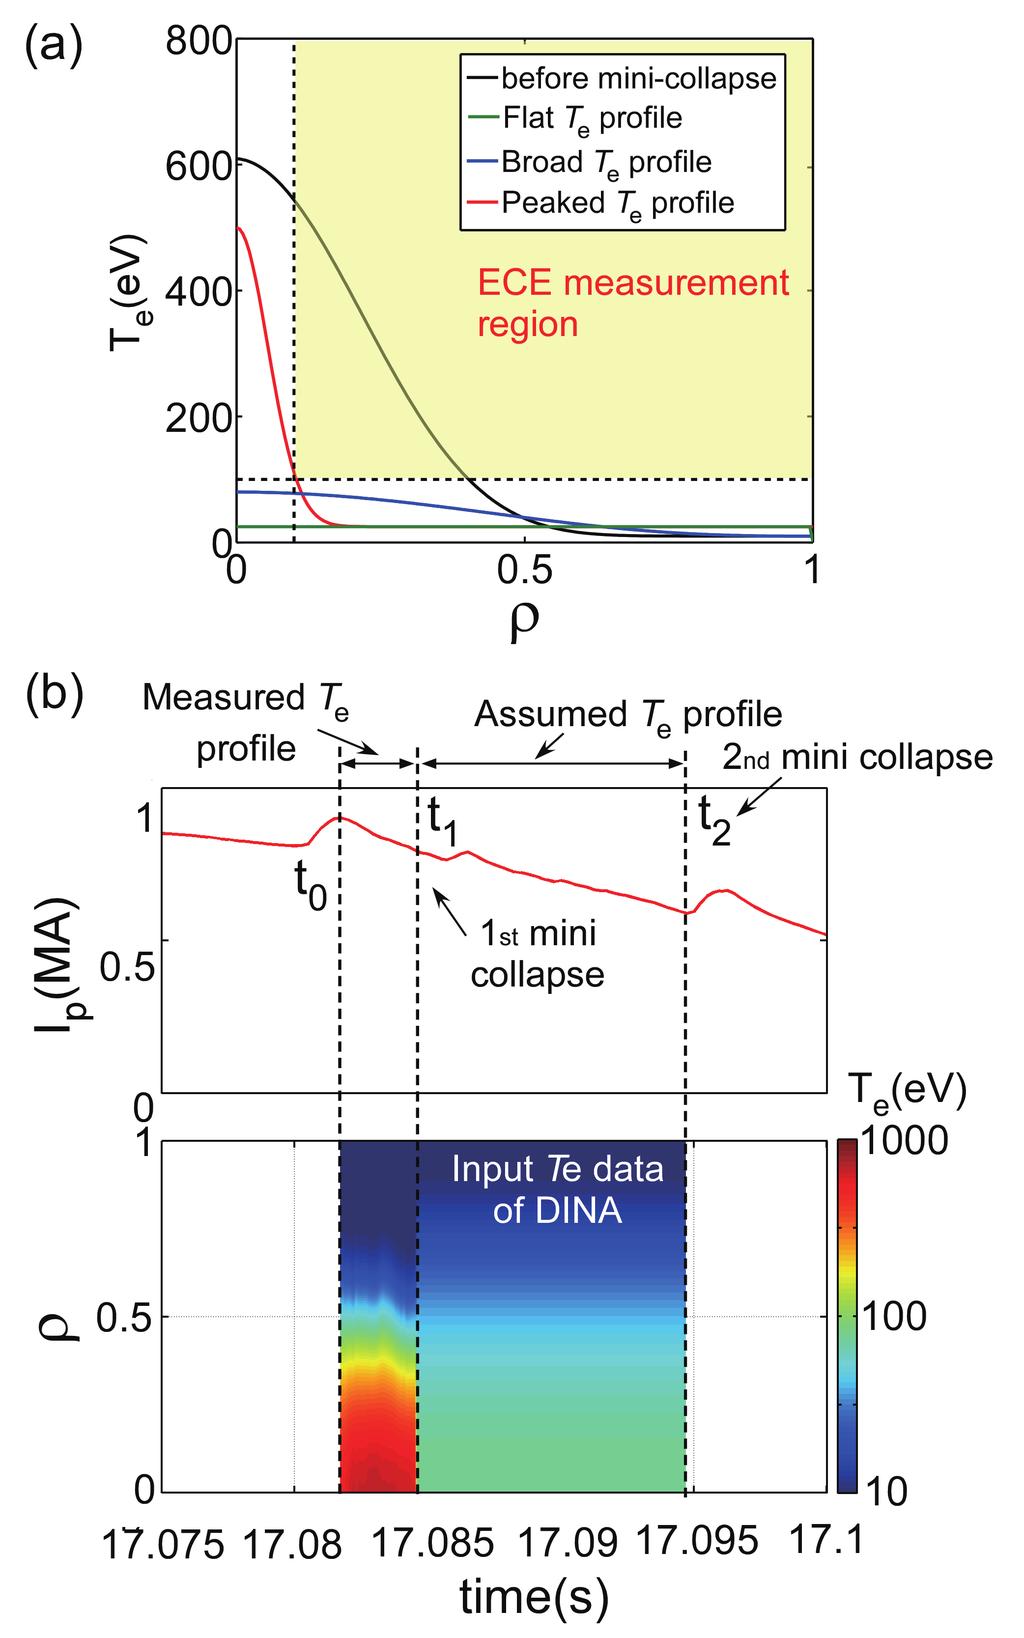 Fig. 3 (a) Assumptions of several T e profile in DINA simulation. (b) The time evolutions of plasma current and the input data of T e profile in DINA simulation. Fig.